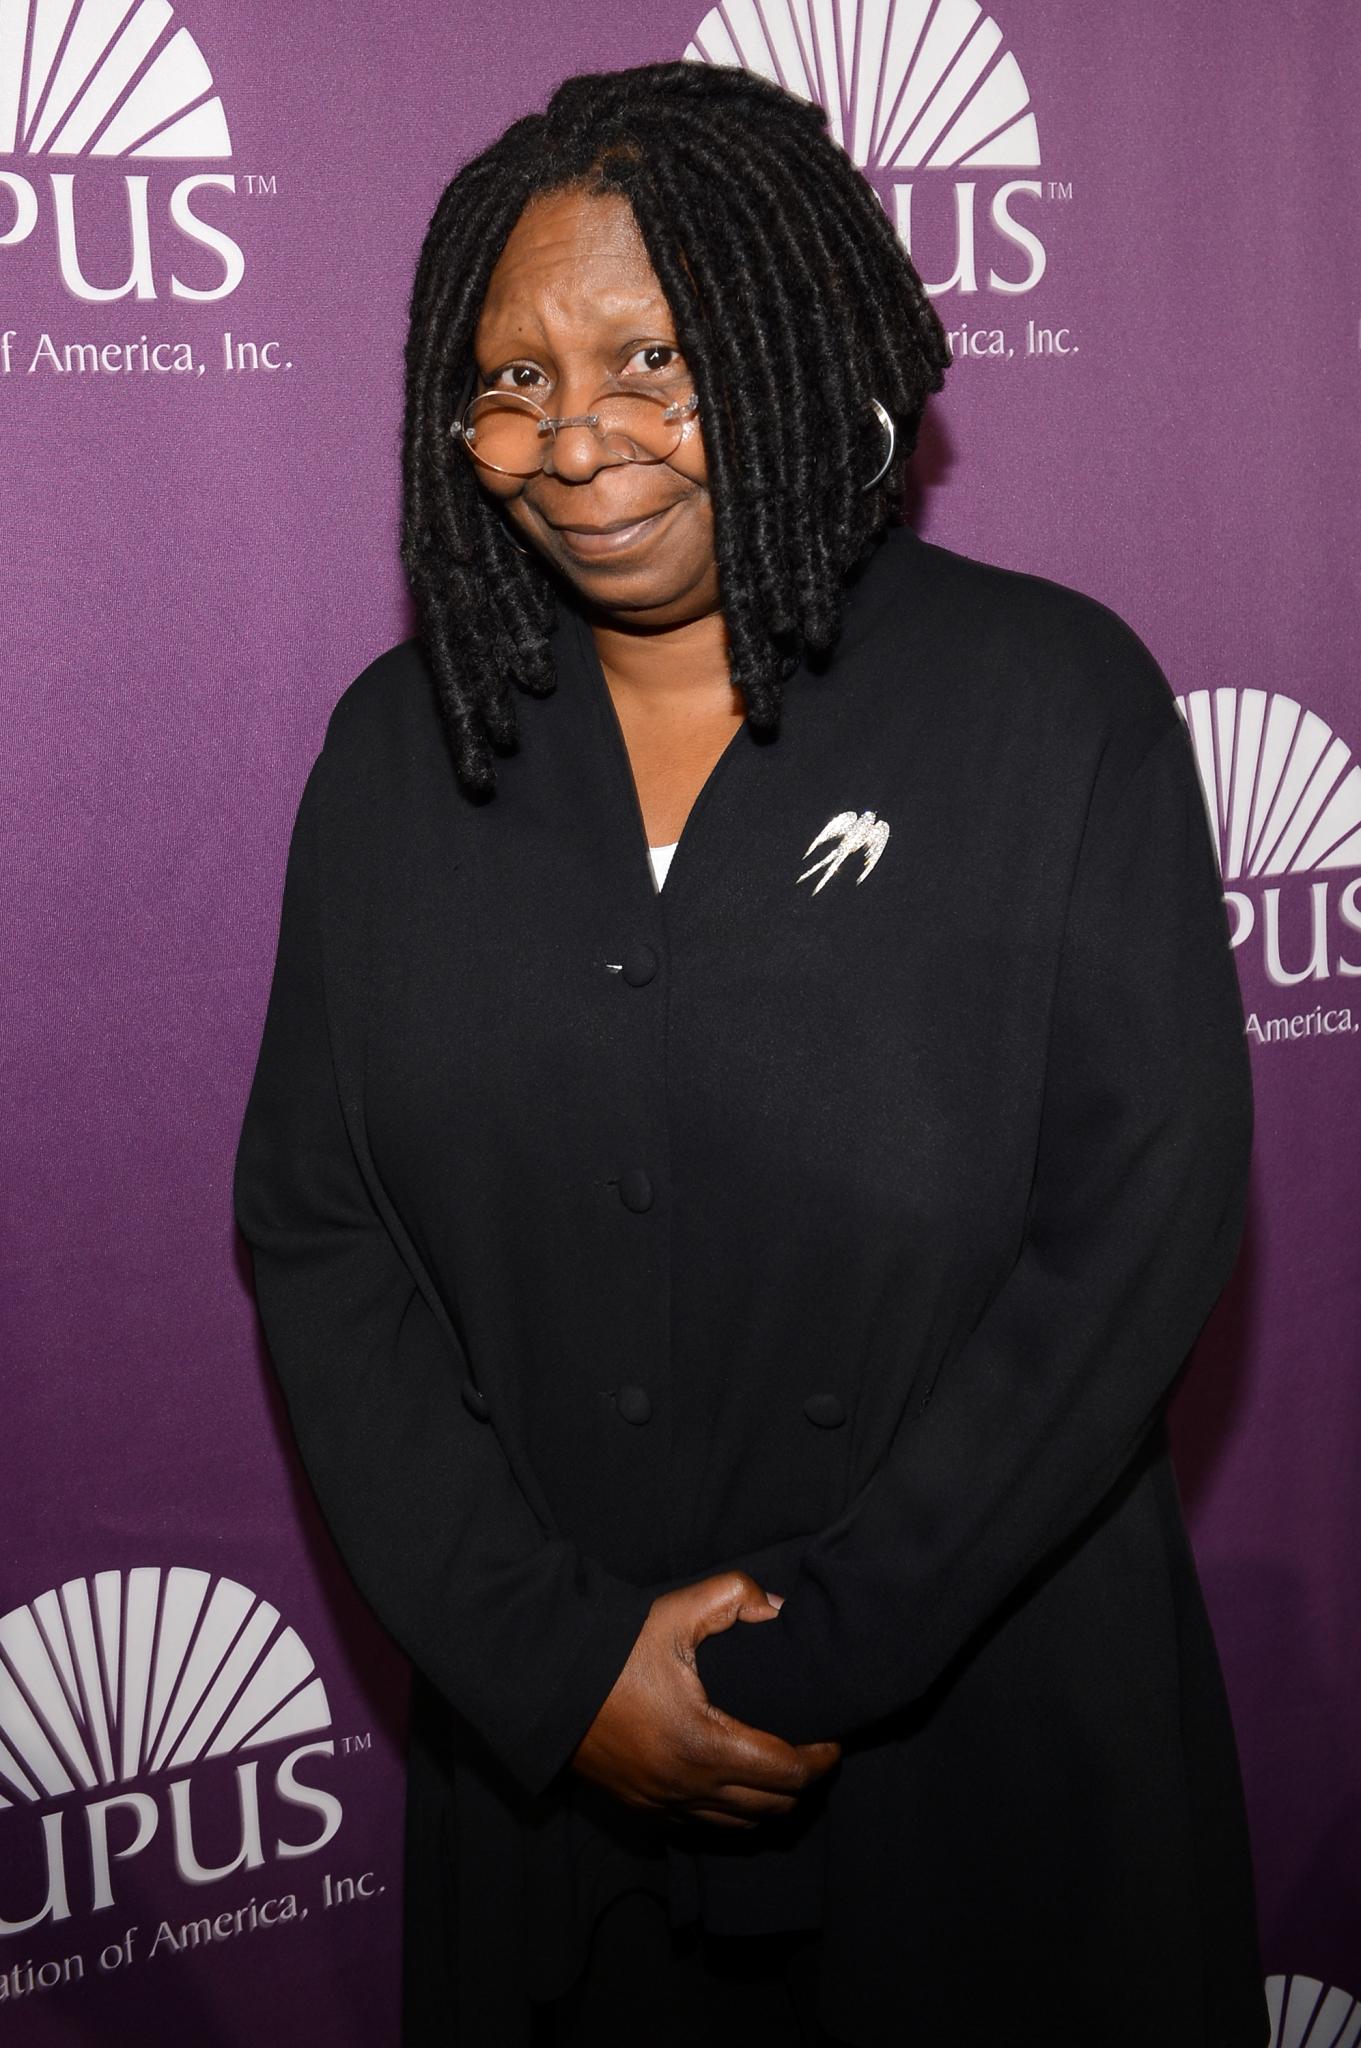 Do You Agree with Whoopi Goldberg's Comments on Being American, not African-American?